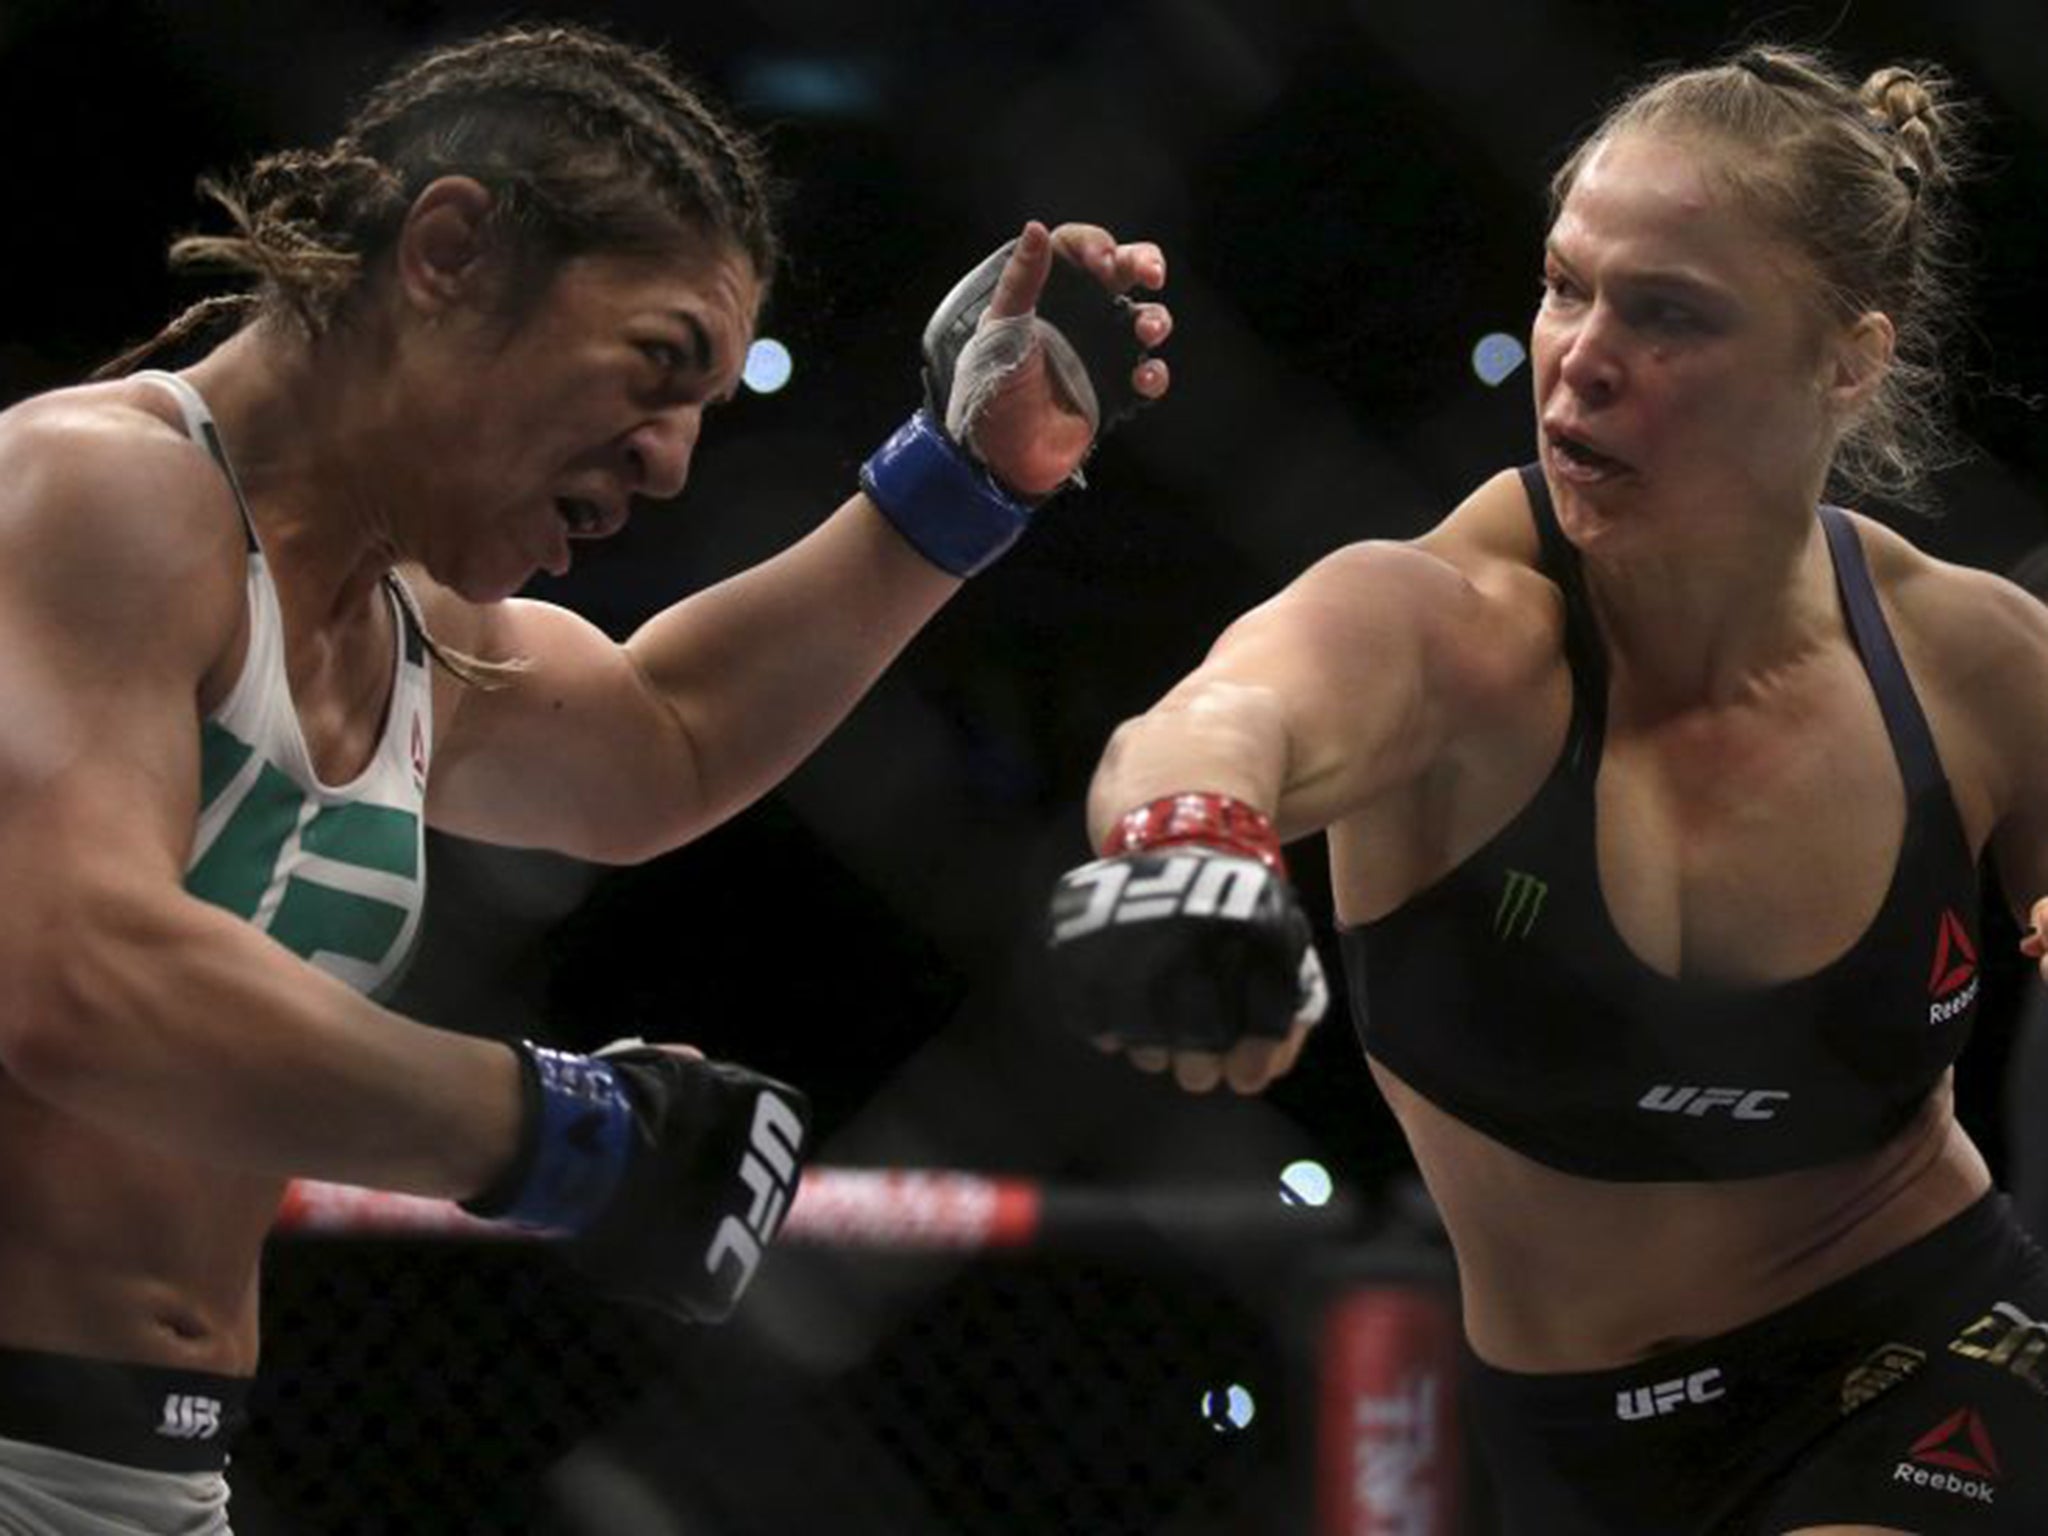 &#13;
Ronda Rousey (right) on her way to beating Bethe Correia in their title fight in August&#13;